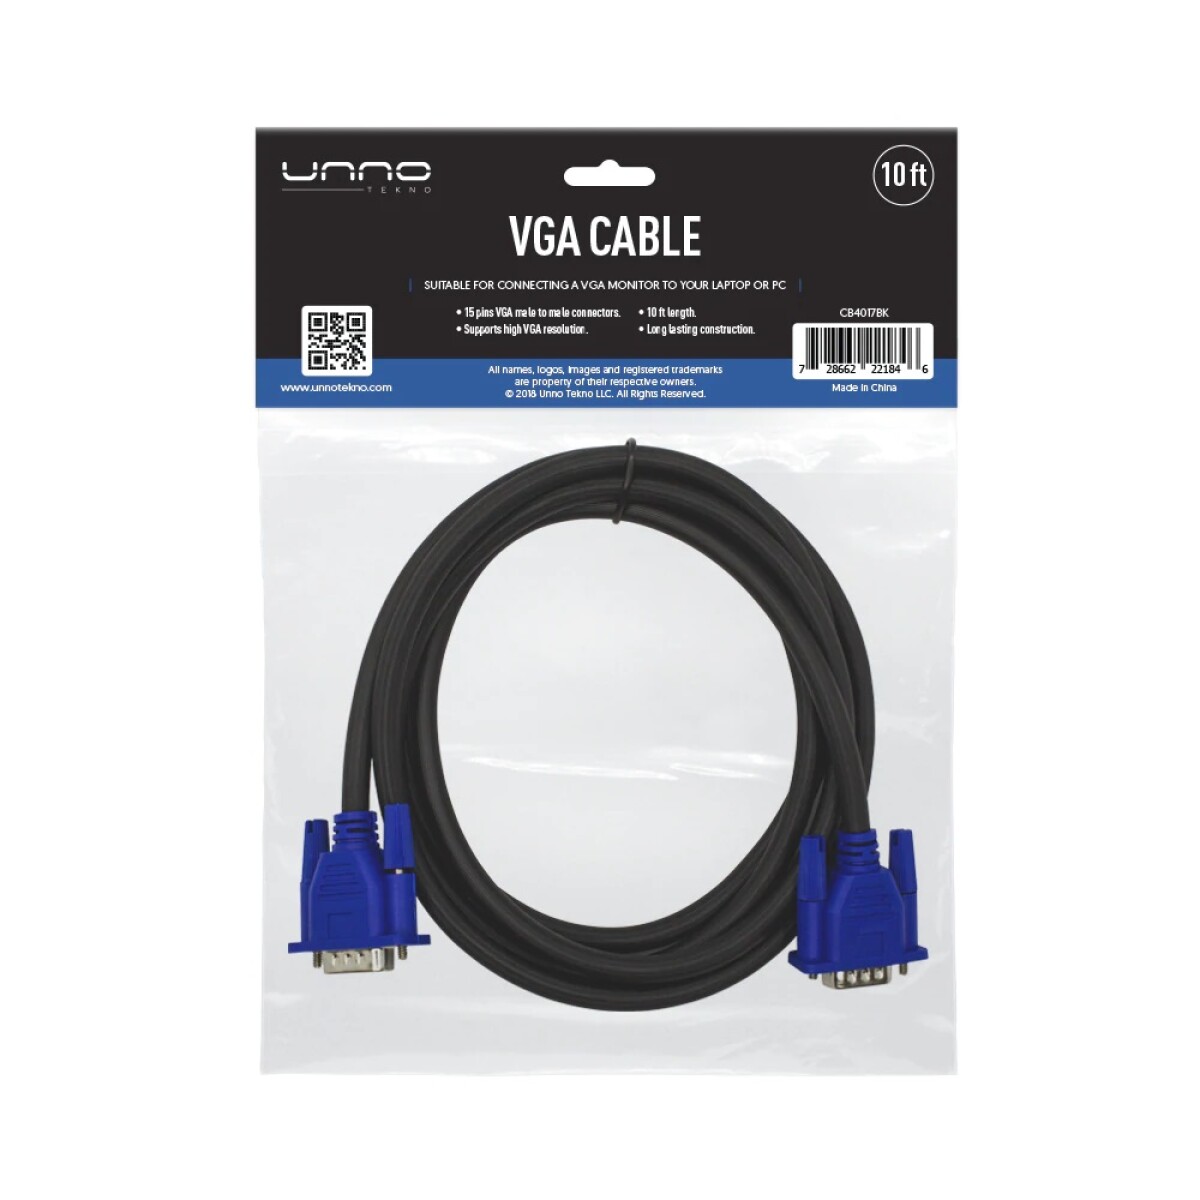 SUPPORTS HIGH VGA RESOLUTION,10FT - 001 